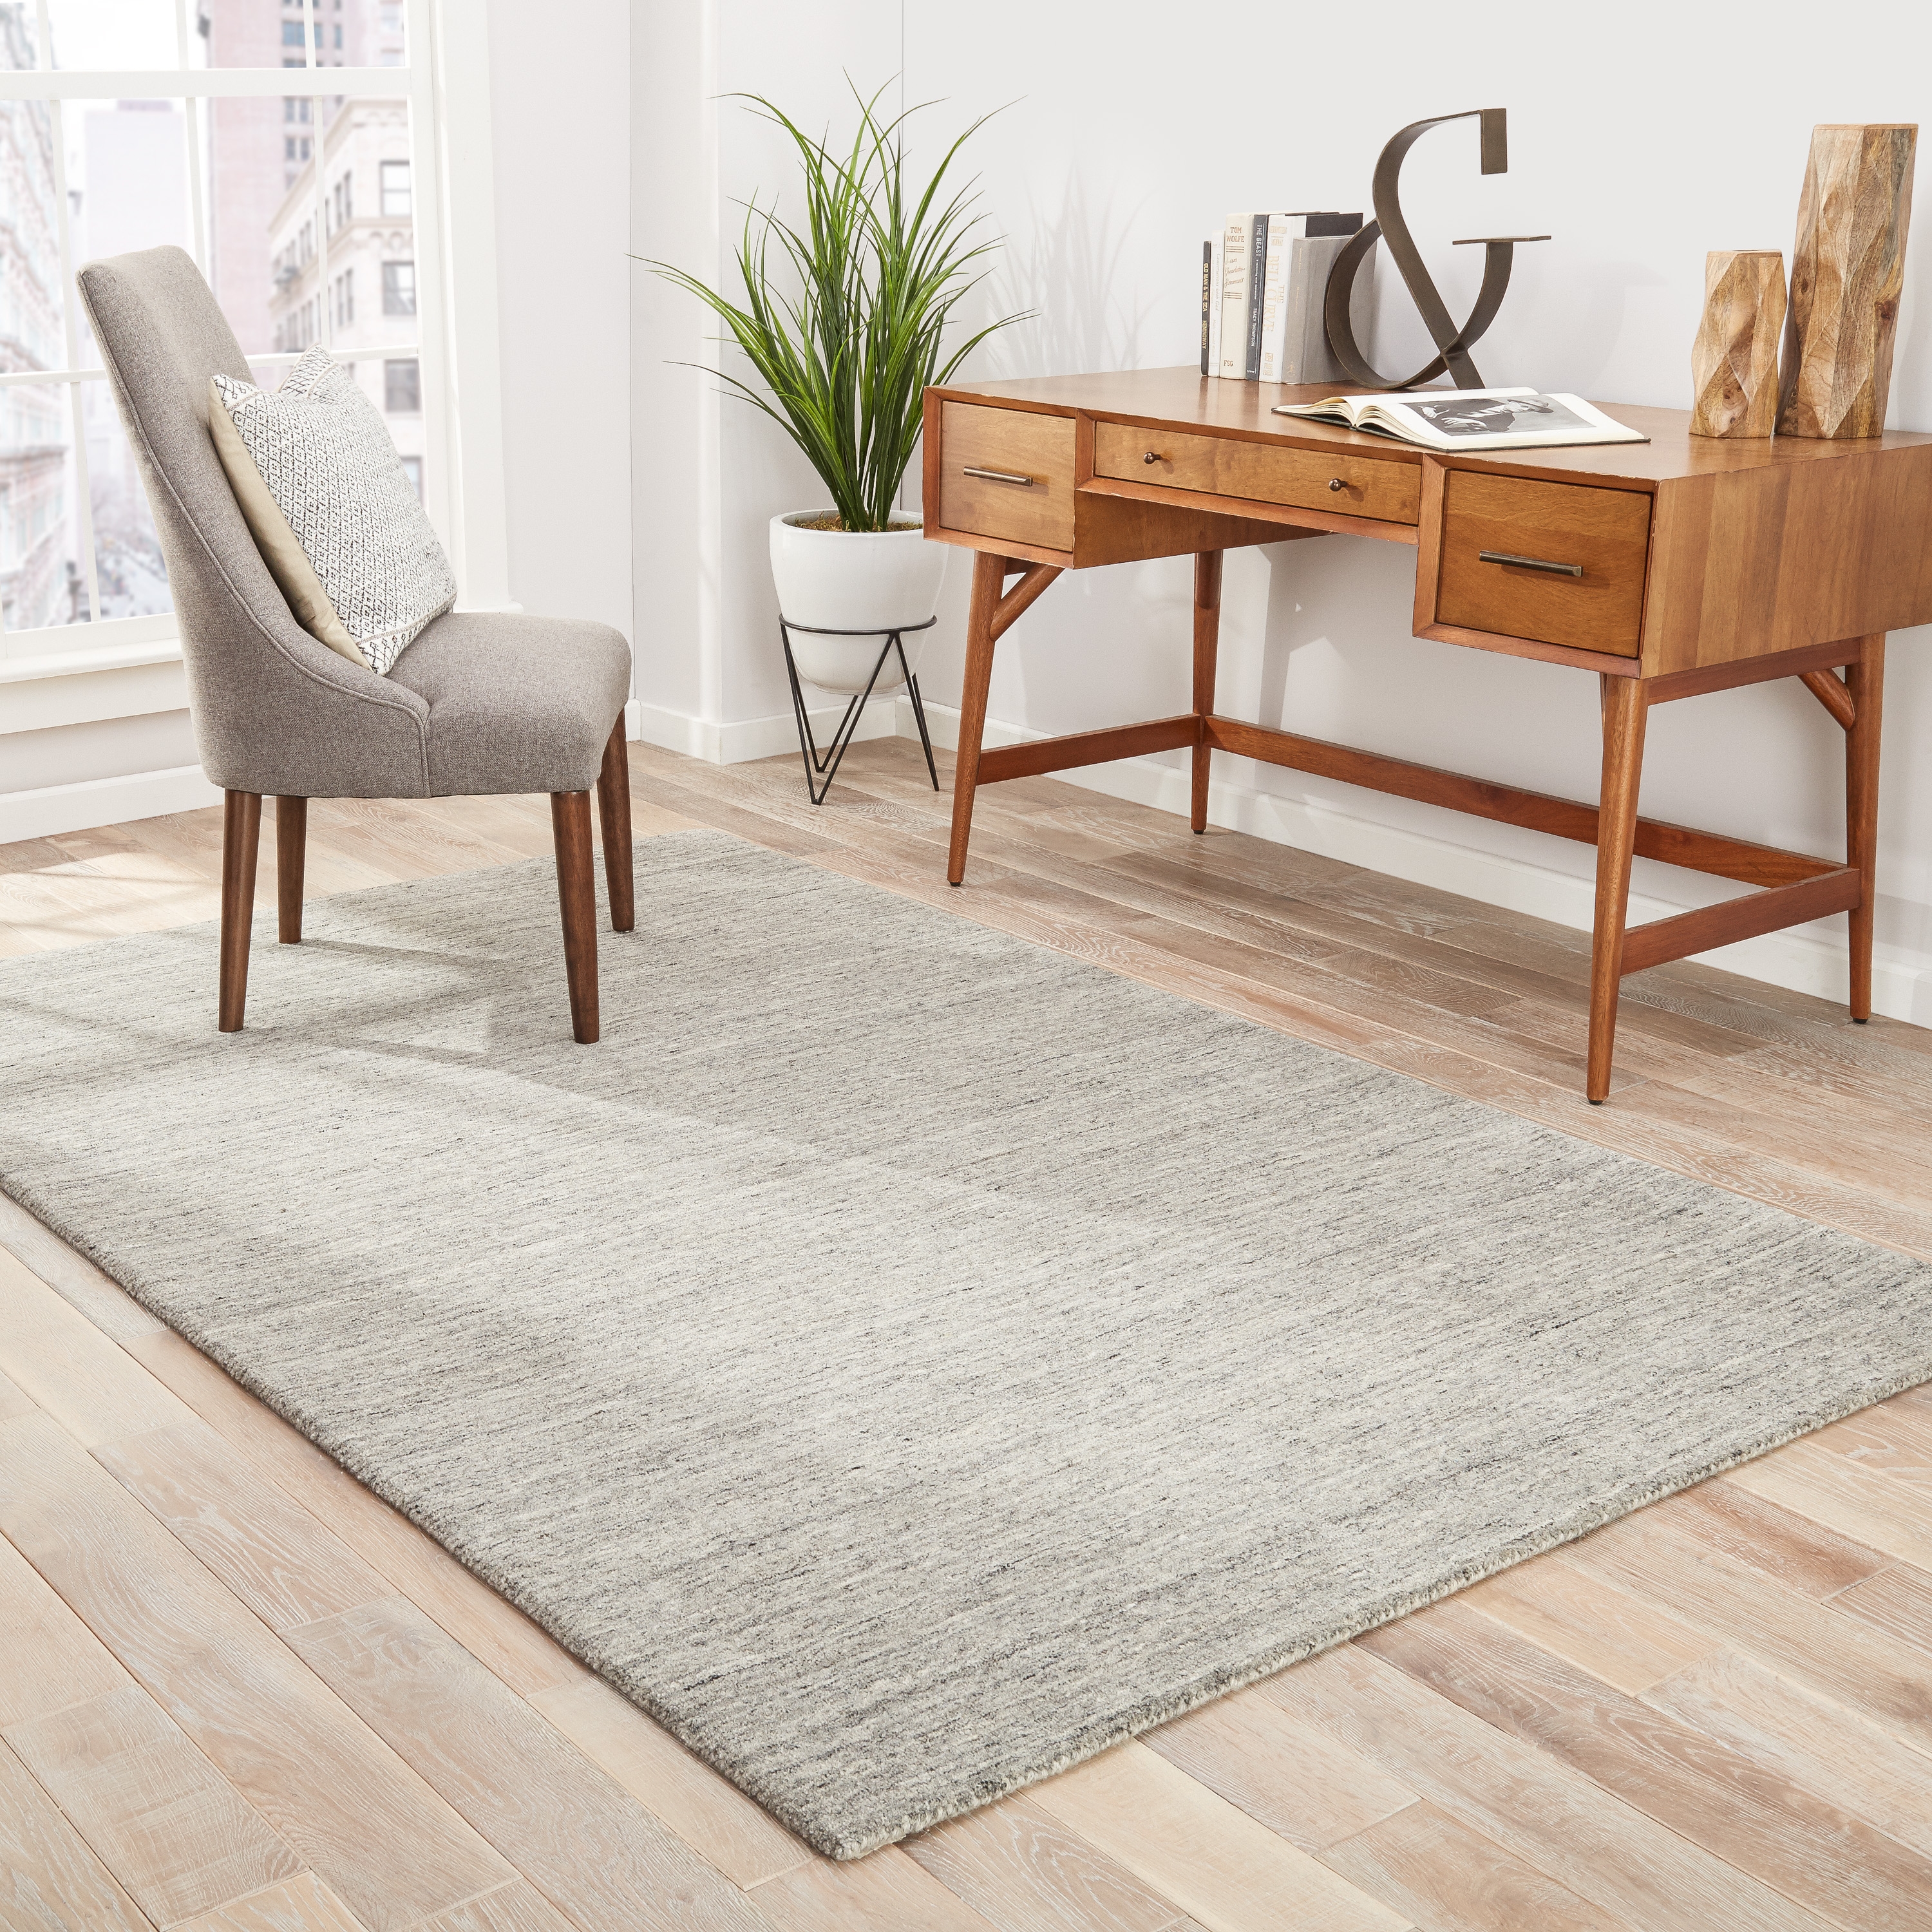 Elements Handmade Solid Gray/ Taupe Runner Rug (2'6" X 8') - Image 4